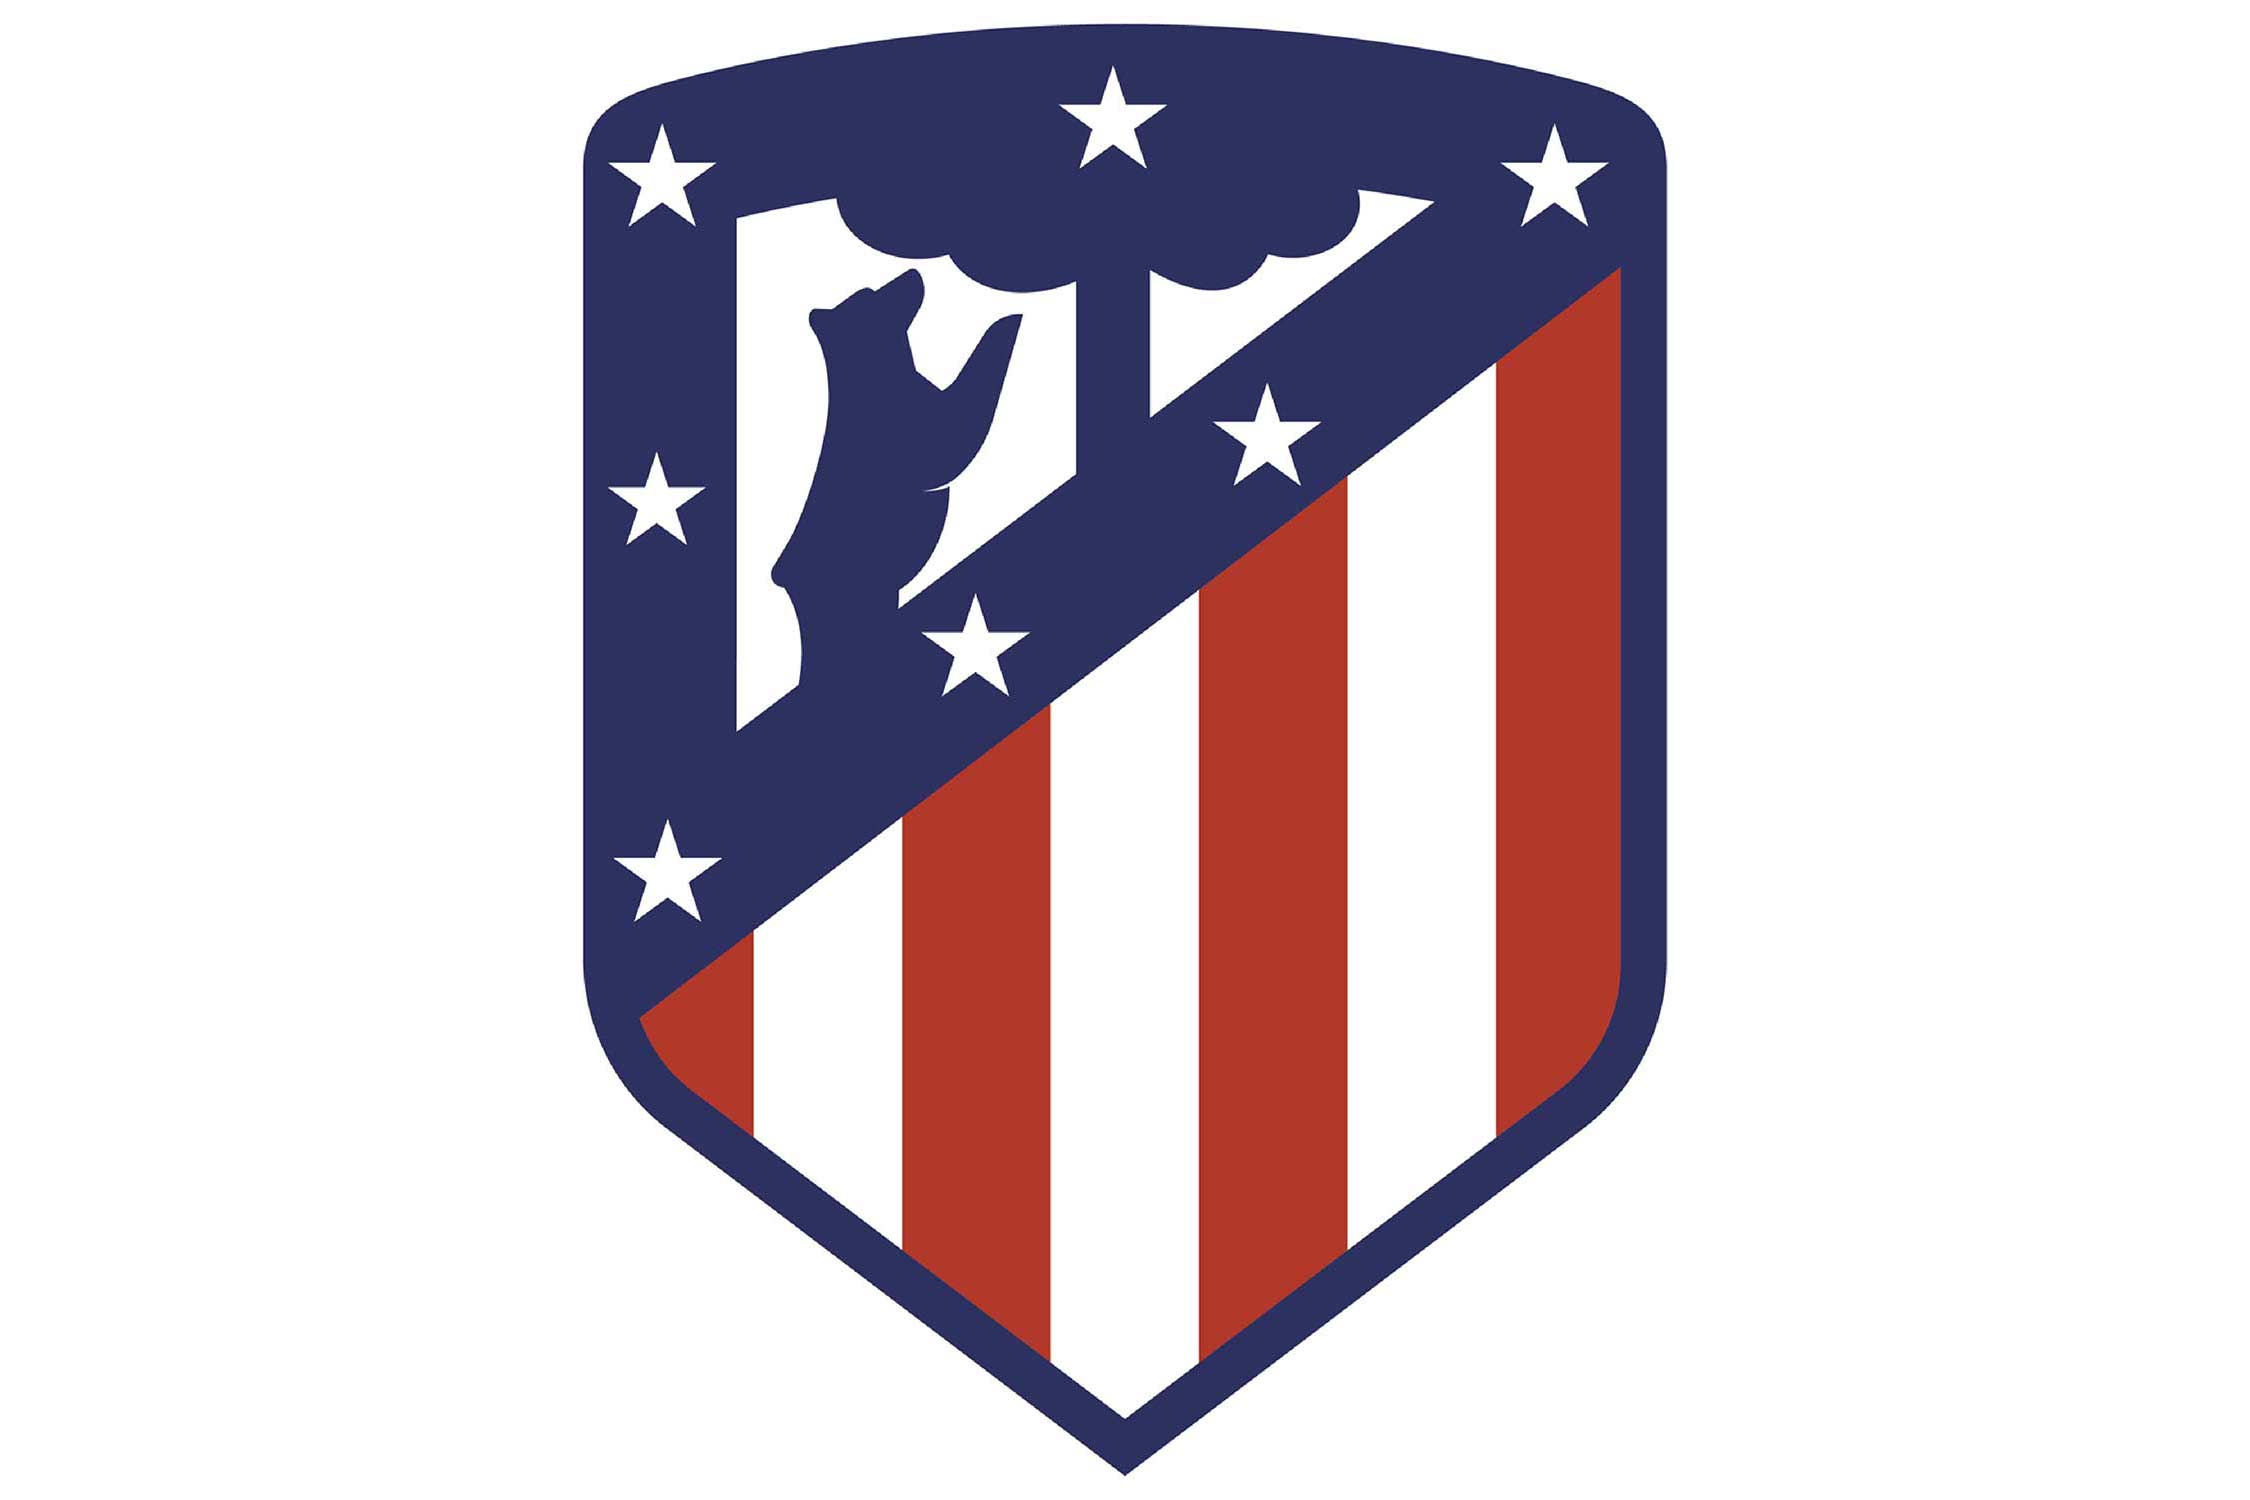 Red White Blue Soccer Logo - Hidden explanations for soccer clubs' crests around the world